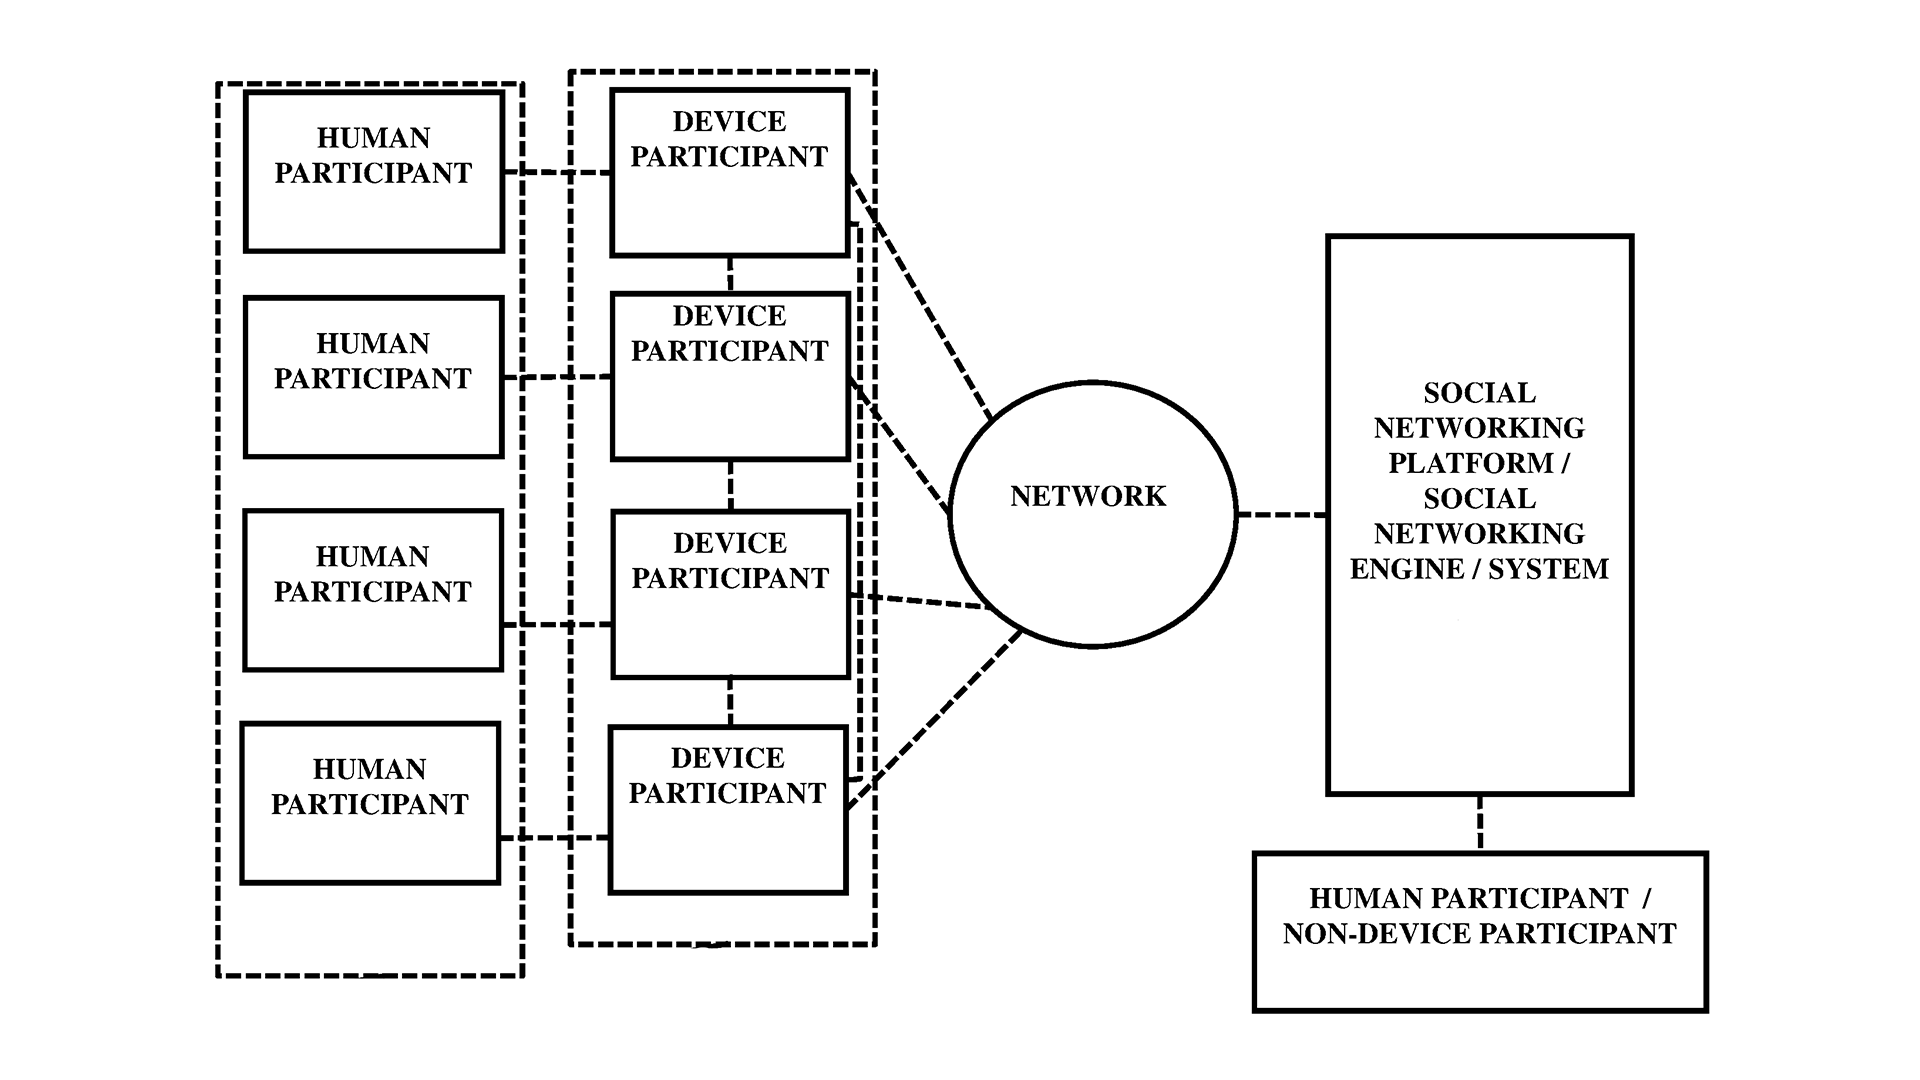 Integrated Health Management System with Medical Device Relationships and Fault Detection